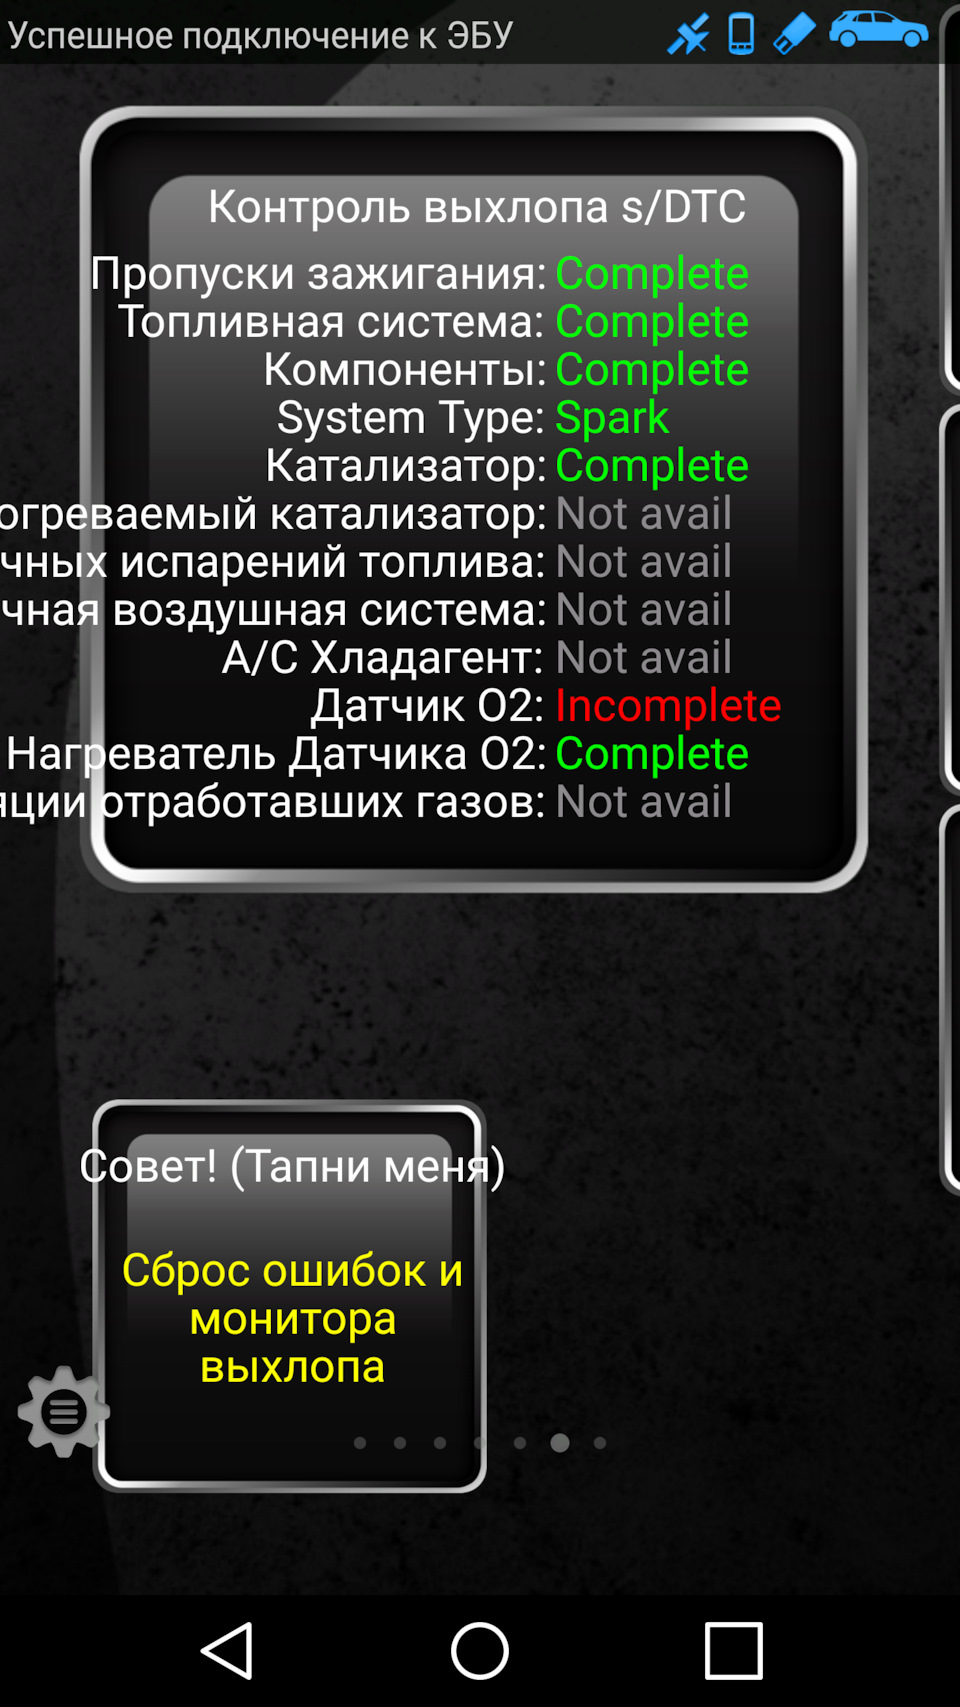 System is not available